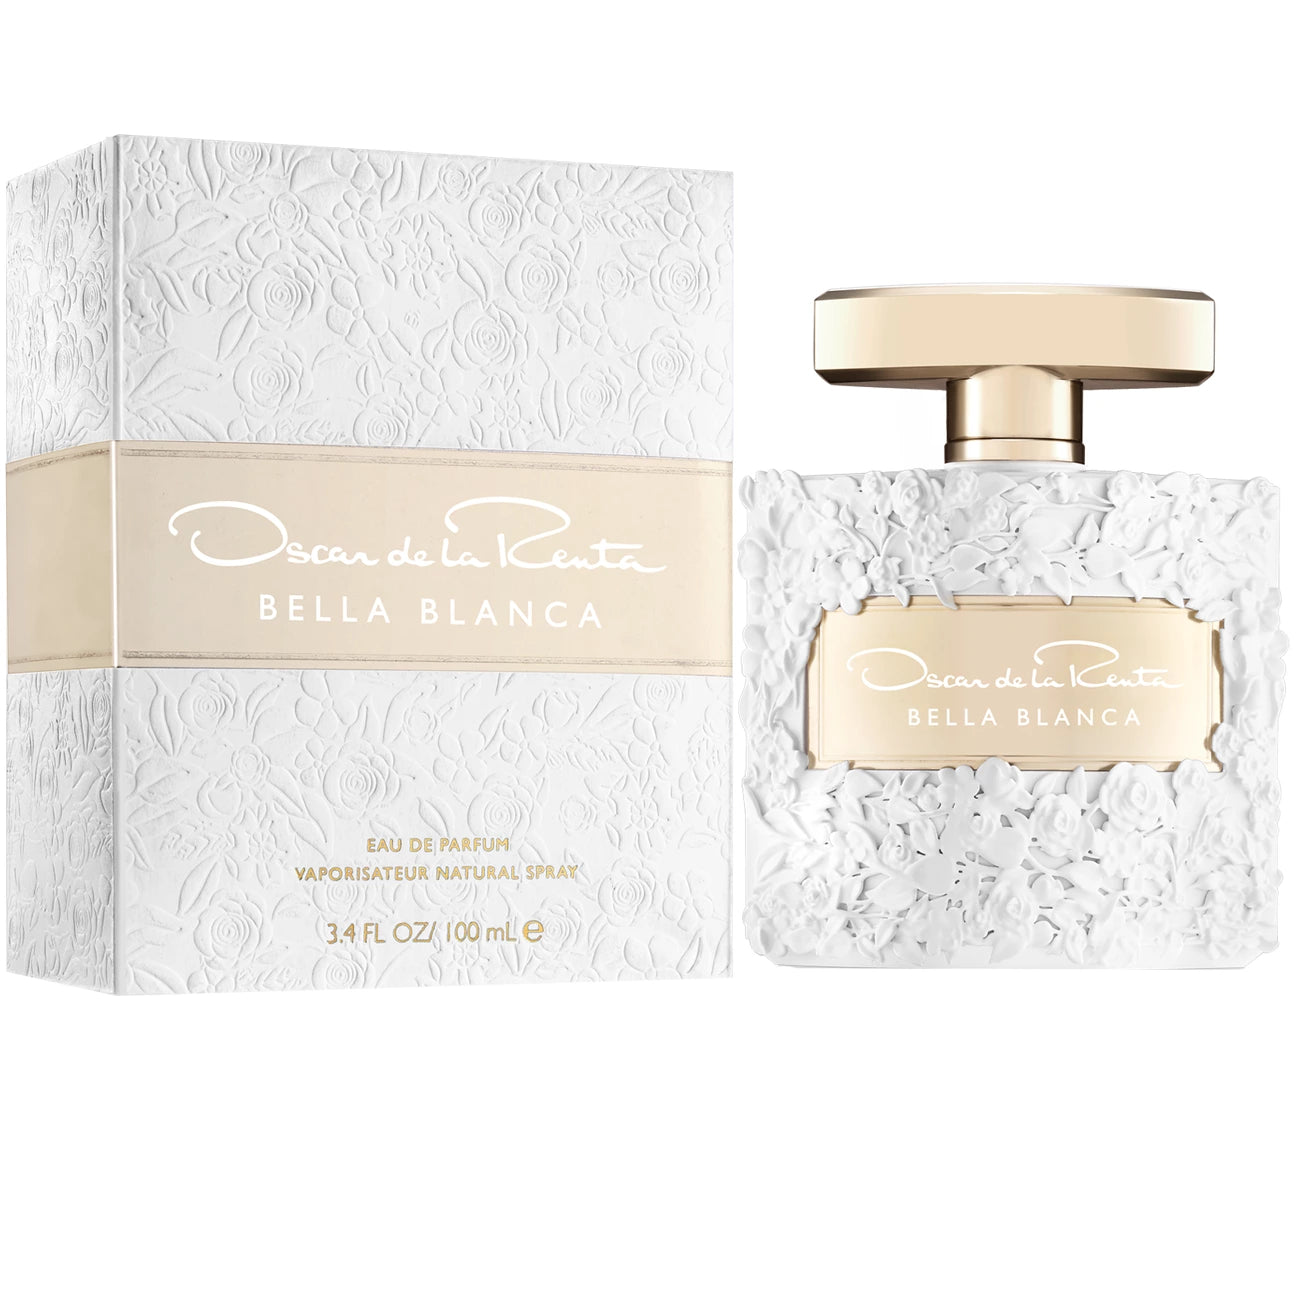 <p class="c-small-font c-margin-bottom-2v description" data-auto="product-description" data-mce-fragment="1" itemprop="description">Introducing Bella Blanca, the new fragrance from Oscar de la Renta. Inspired by nature's beauty, the fragrance combines the dewy floral scent of wet freesia with the luxurious allure of jasmine sambac, before settling to creamy sandalwood. A sensual fragrance, mesmerizing the senses. The perfect embodiment of the modern Oscar de la Renta woman.</p>
<ul class="c-small-font c-margin-bottom-7v bullets-section" data-auto="product-description-bullets" data-mce-fragment="1">
<li data-mce-fragment="1">Top Note: Wet Freesia</li>
<li data-mce-fragment="1">Middle Note: Jasmine Sambac</li>
<li data-mce-fragment="1">Base Note: Creamy Sandalwood</li>
</ul>